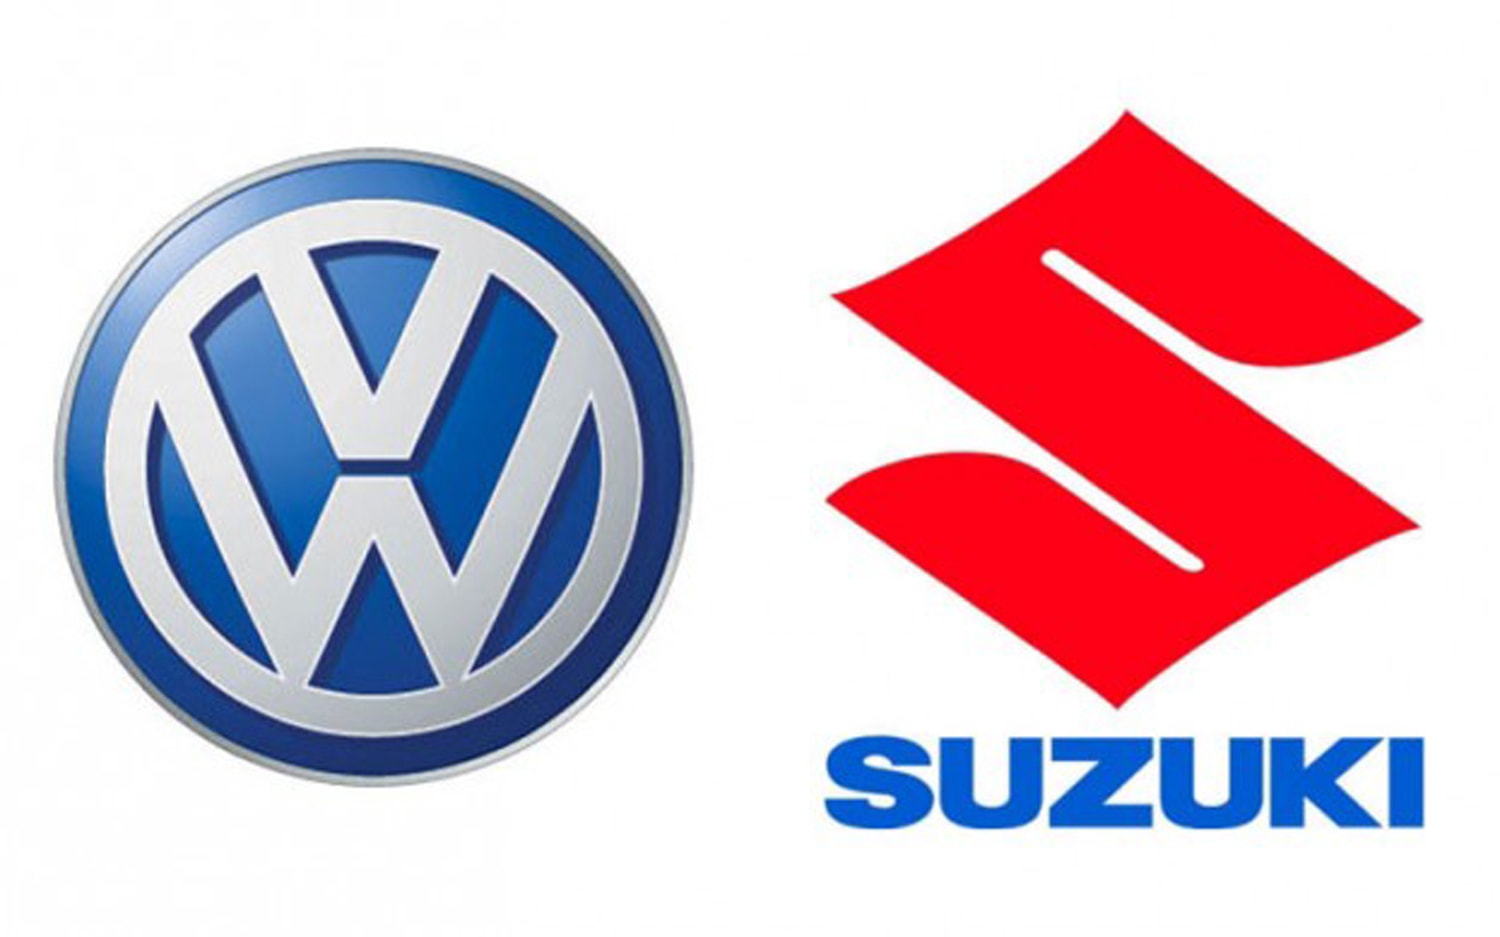 Suzuki says to buy back Volkswagen stake for up to 2.53 billion pounds